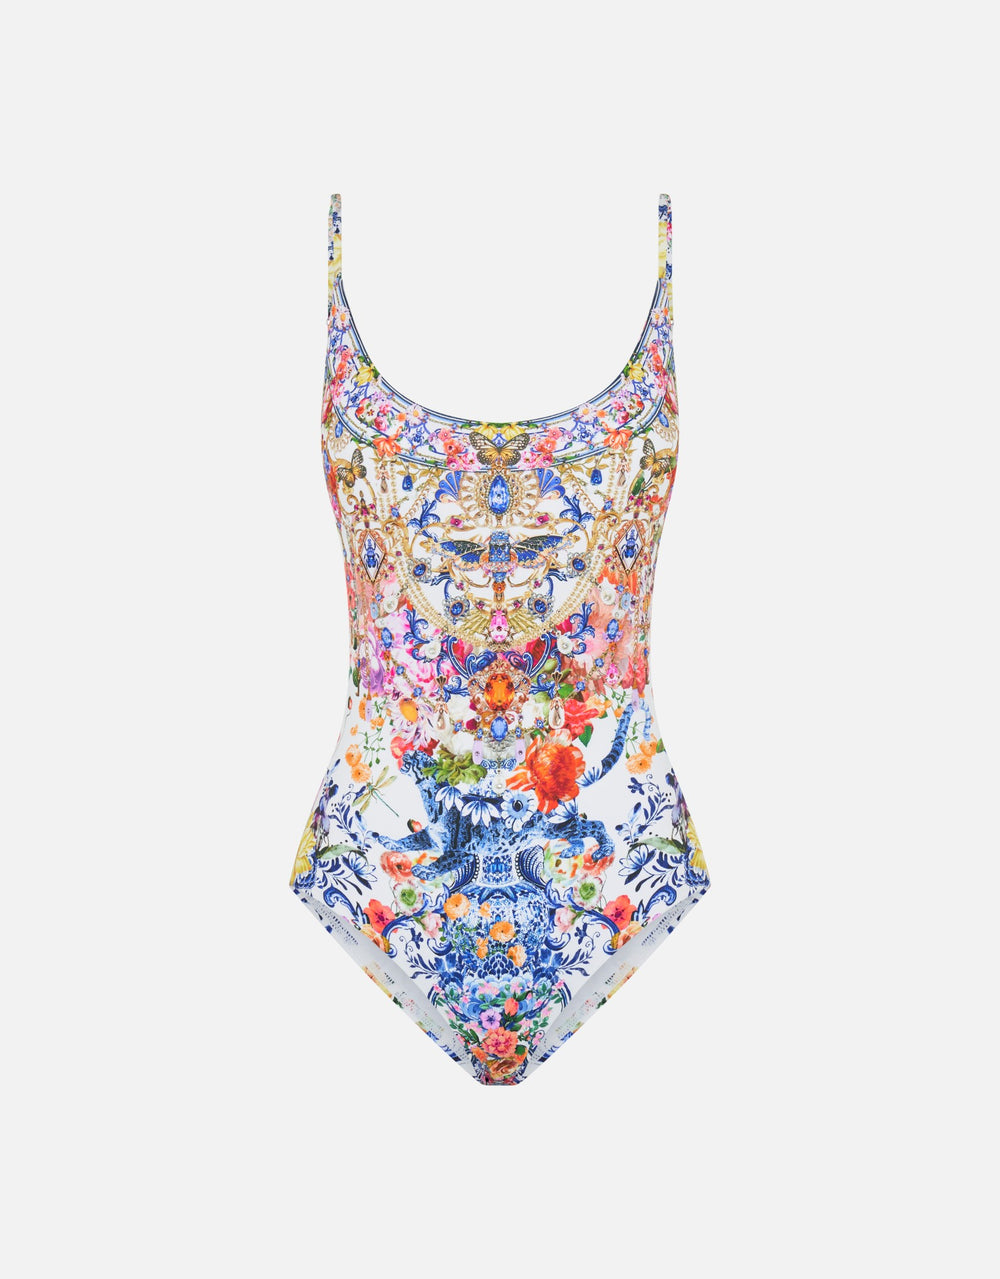 Camilla Scoop Neck One Piece Swimsuit, Dutch Is Life, B-C Cup Floral